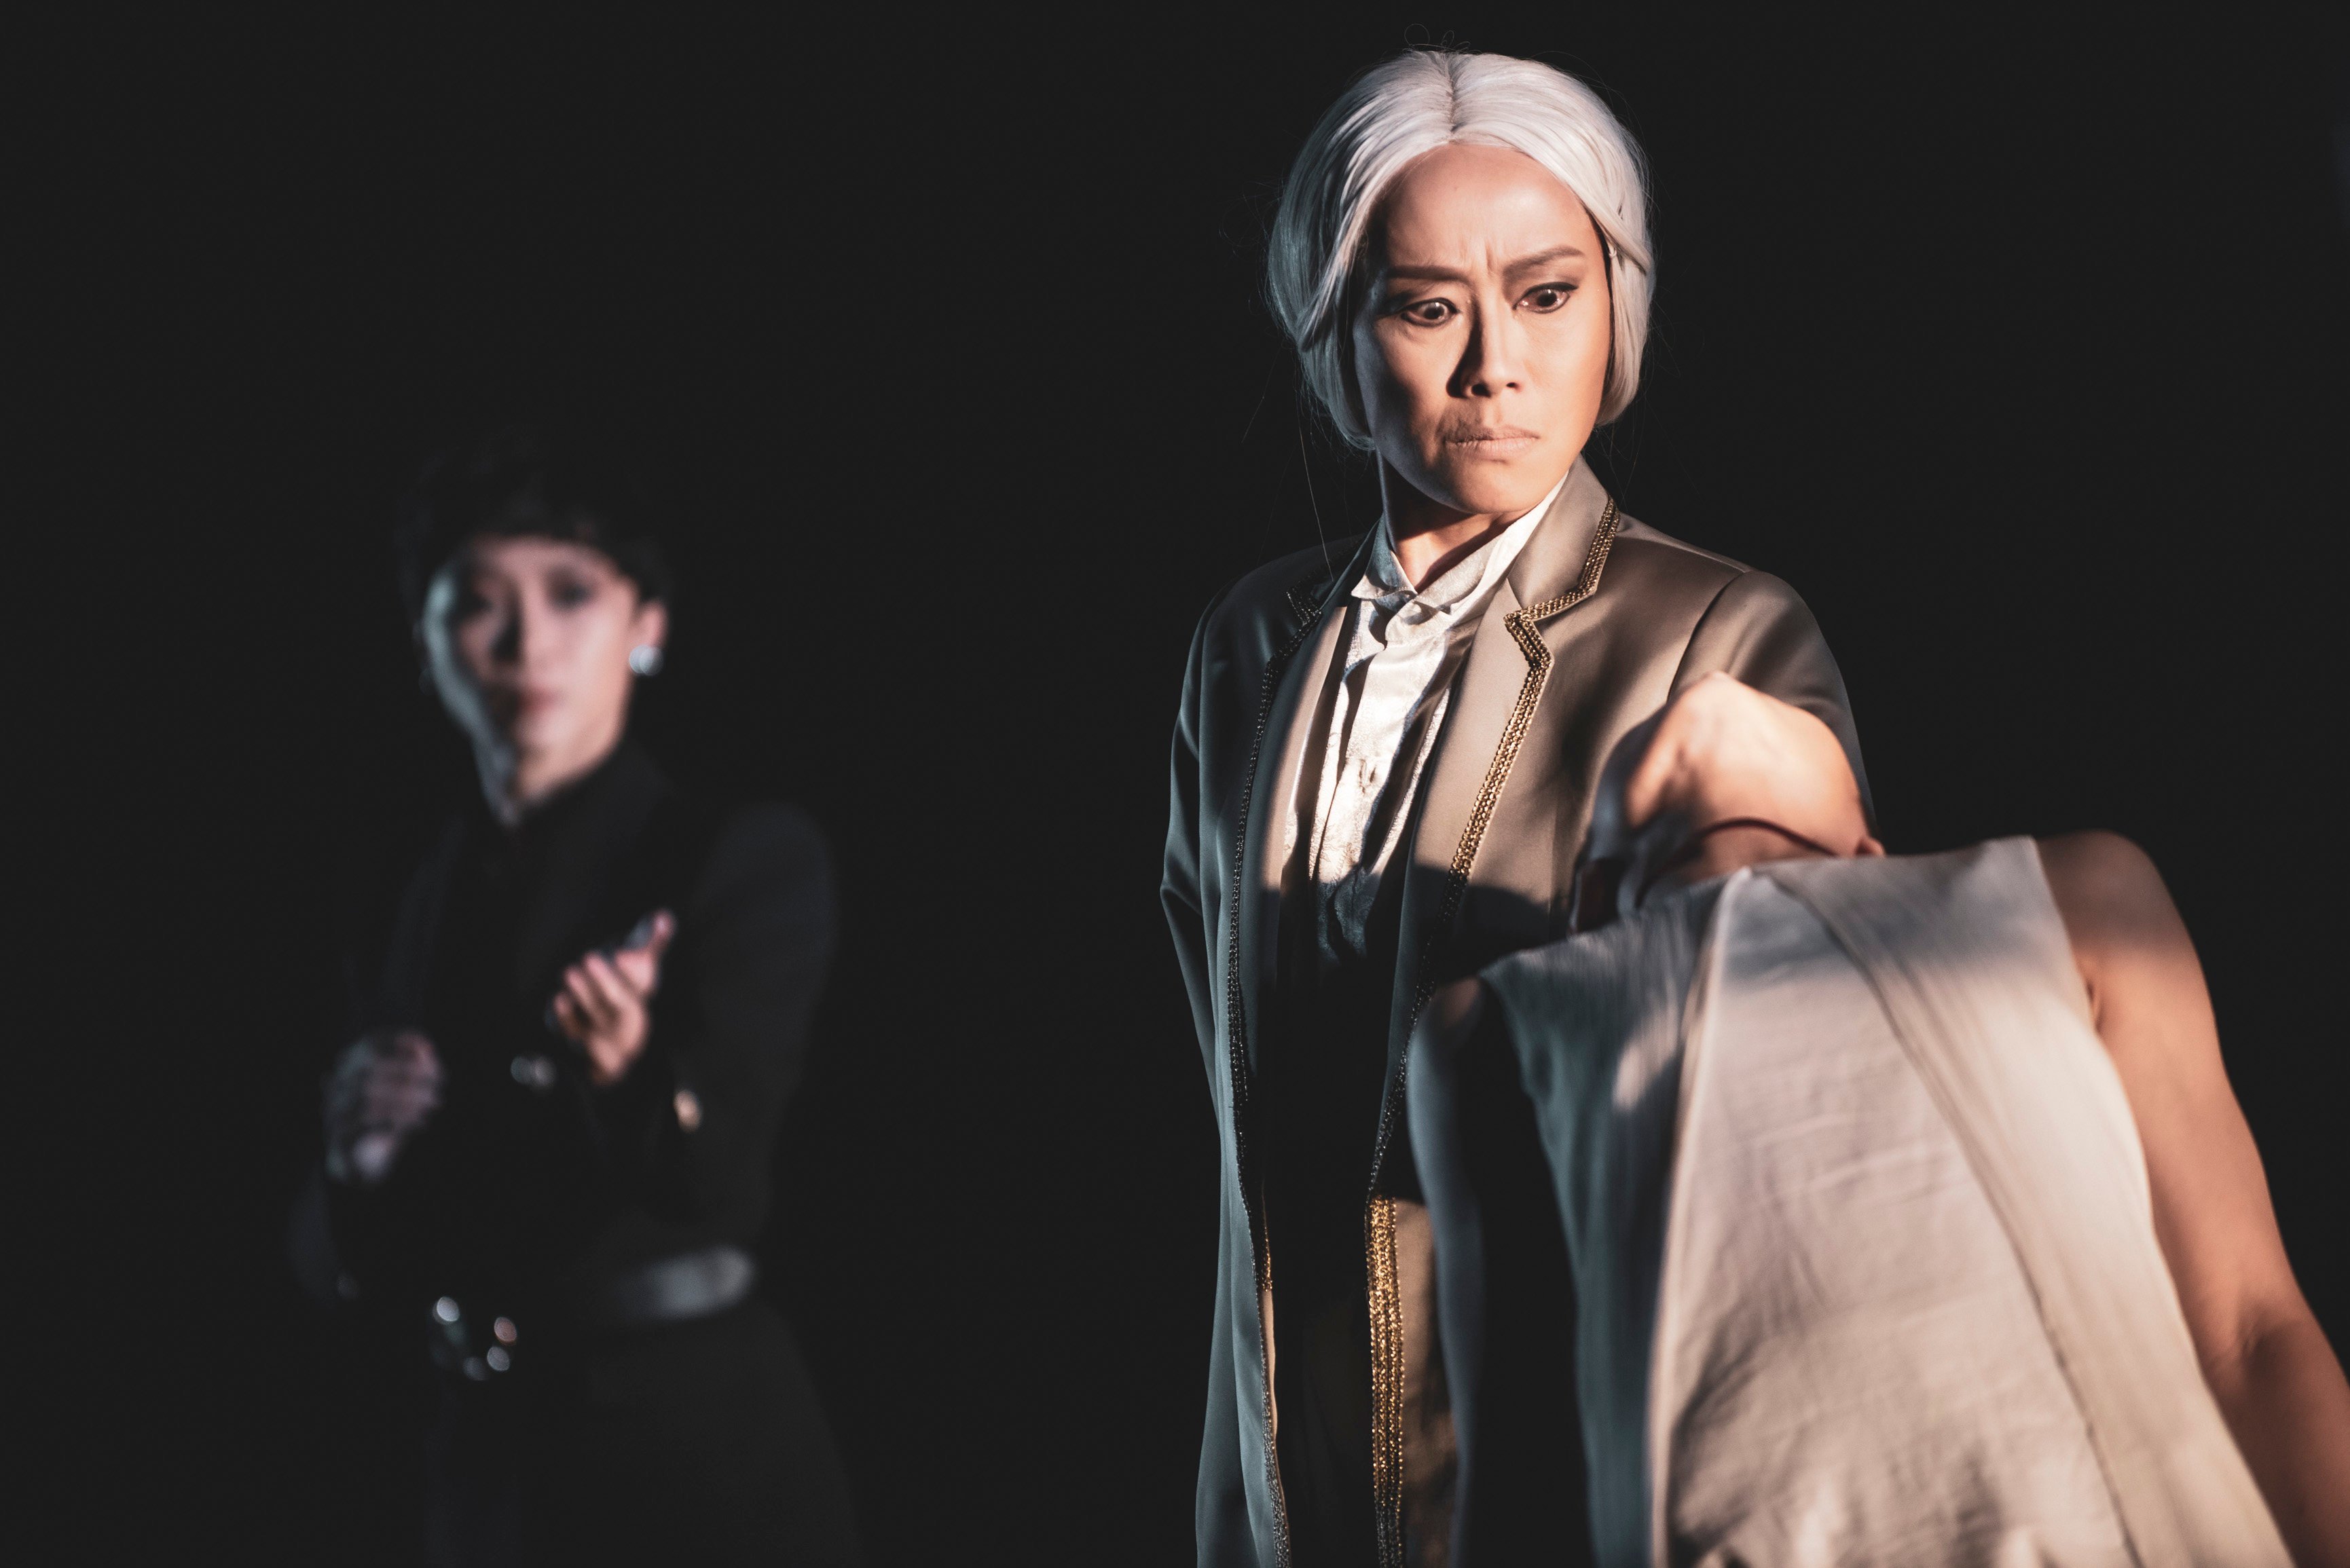 A non-verbal adaptation of King Lear performed by an all-female cast from Hong Kong and Romania will feature in the Hong Kong International Shakespeare Festival, along with other reinterpretations of The Bard’s plays by troupes from around the world. Photo: Tang Shu-wing Theatre Studio